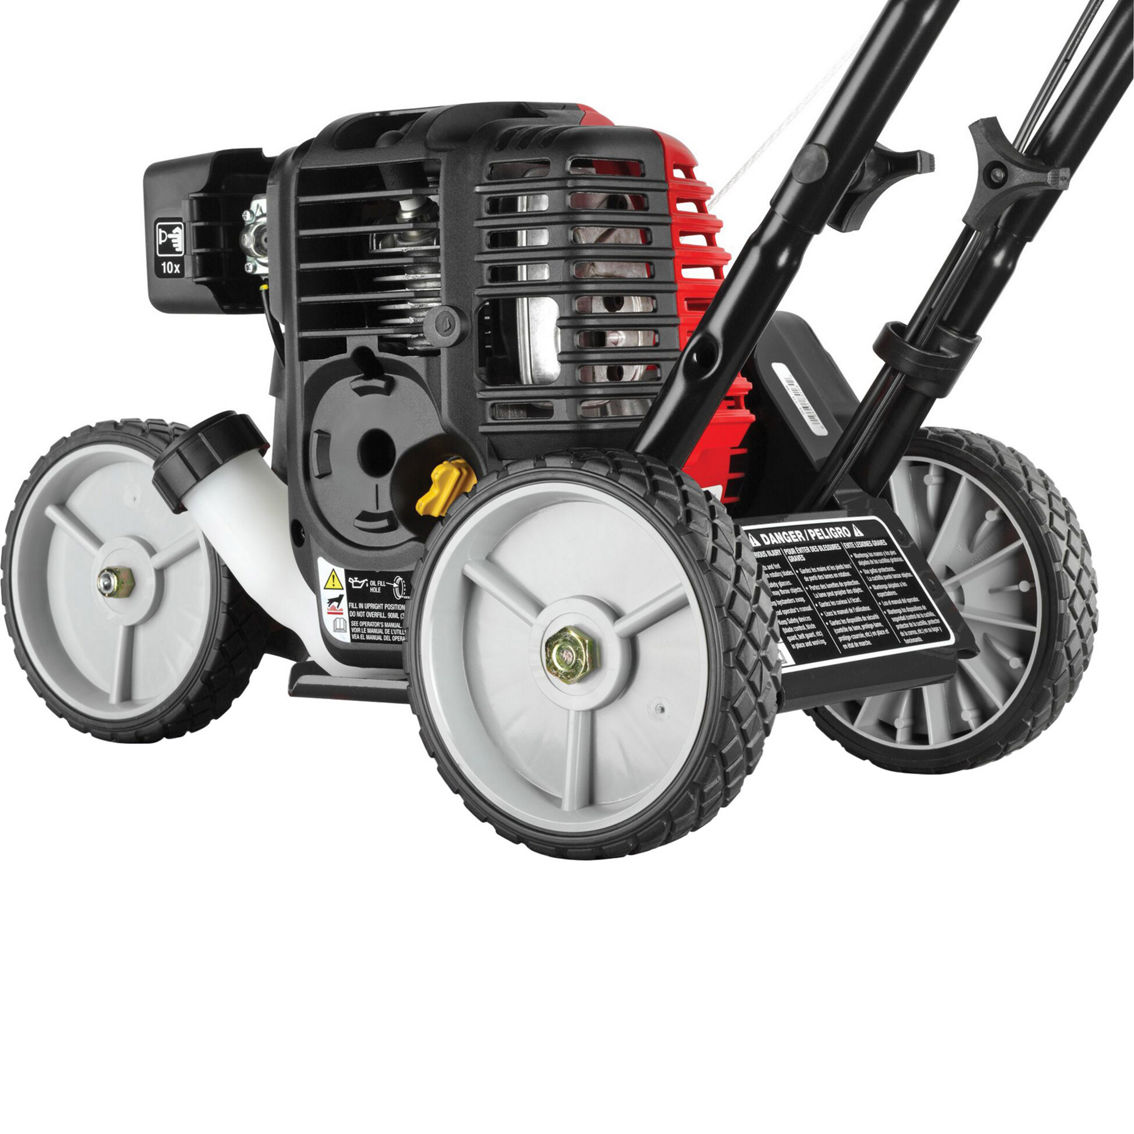 Craftsman 30cc 4-Cycle Gas Edger - Image 5 of 5